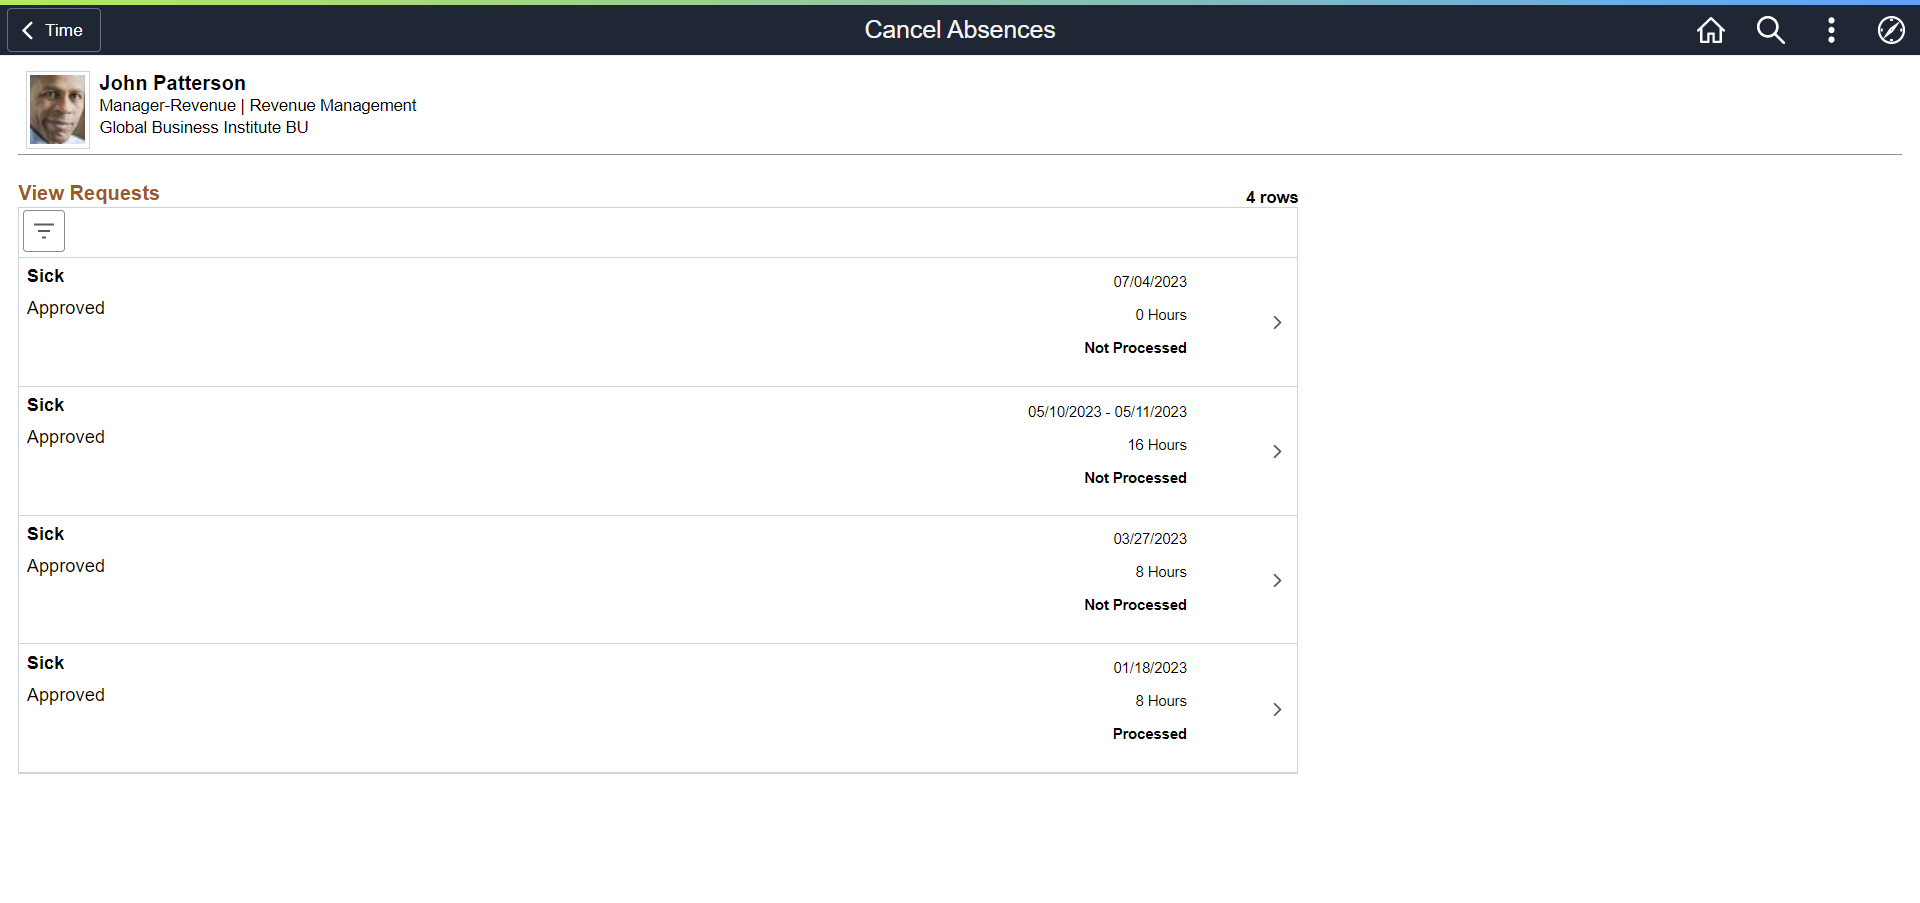 Cancel Absences (View Requests) Page